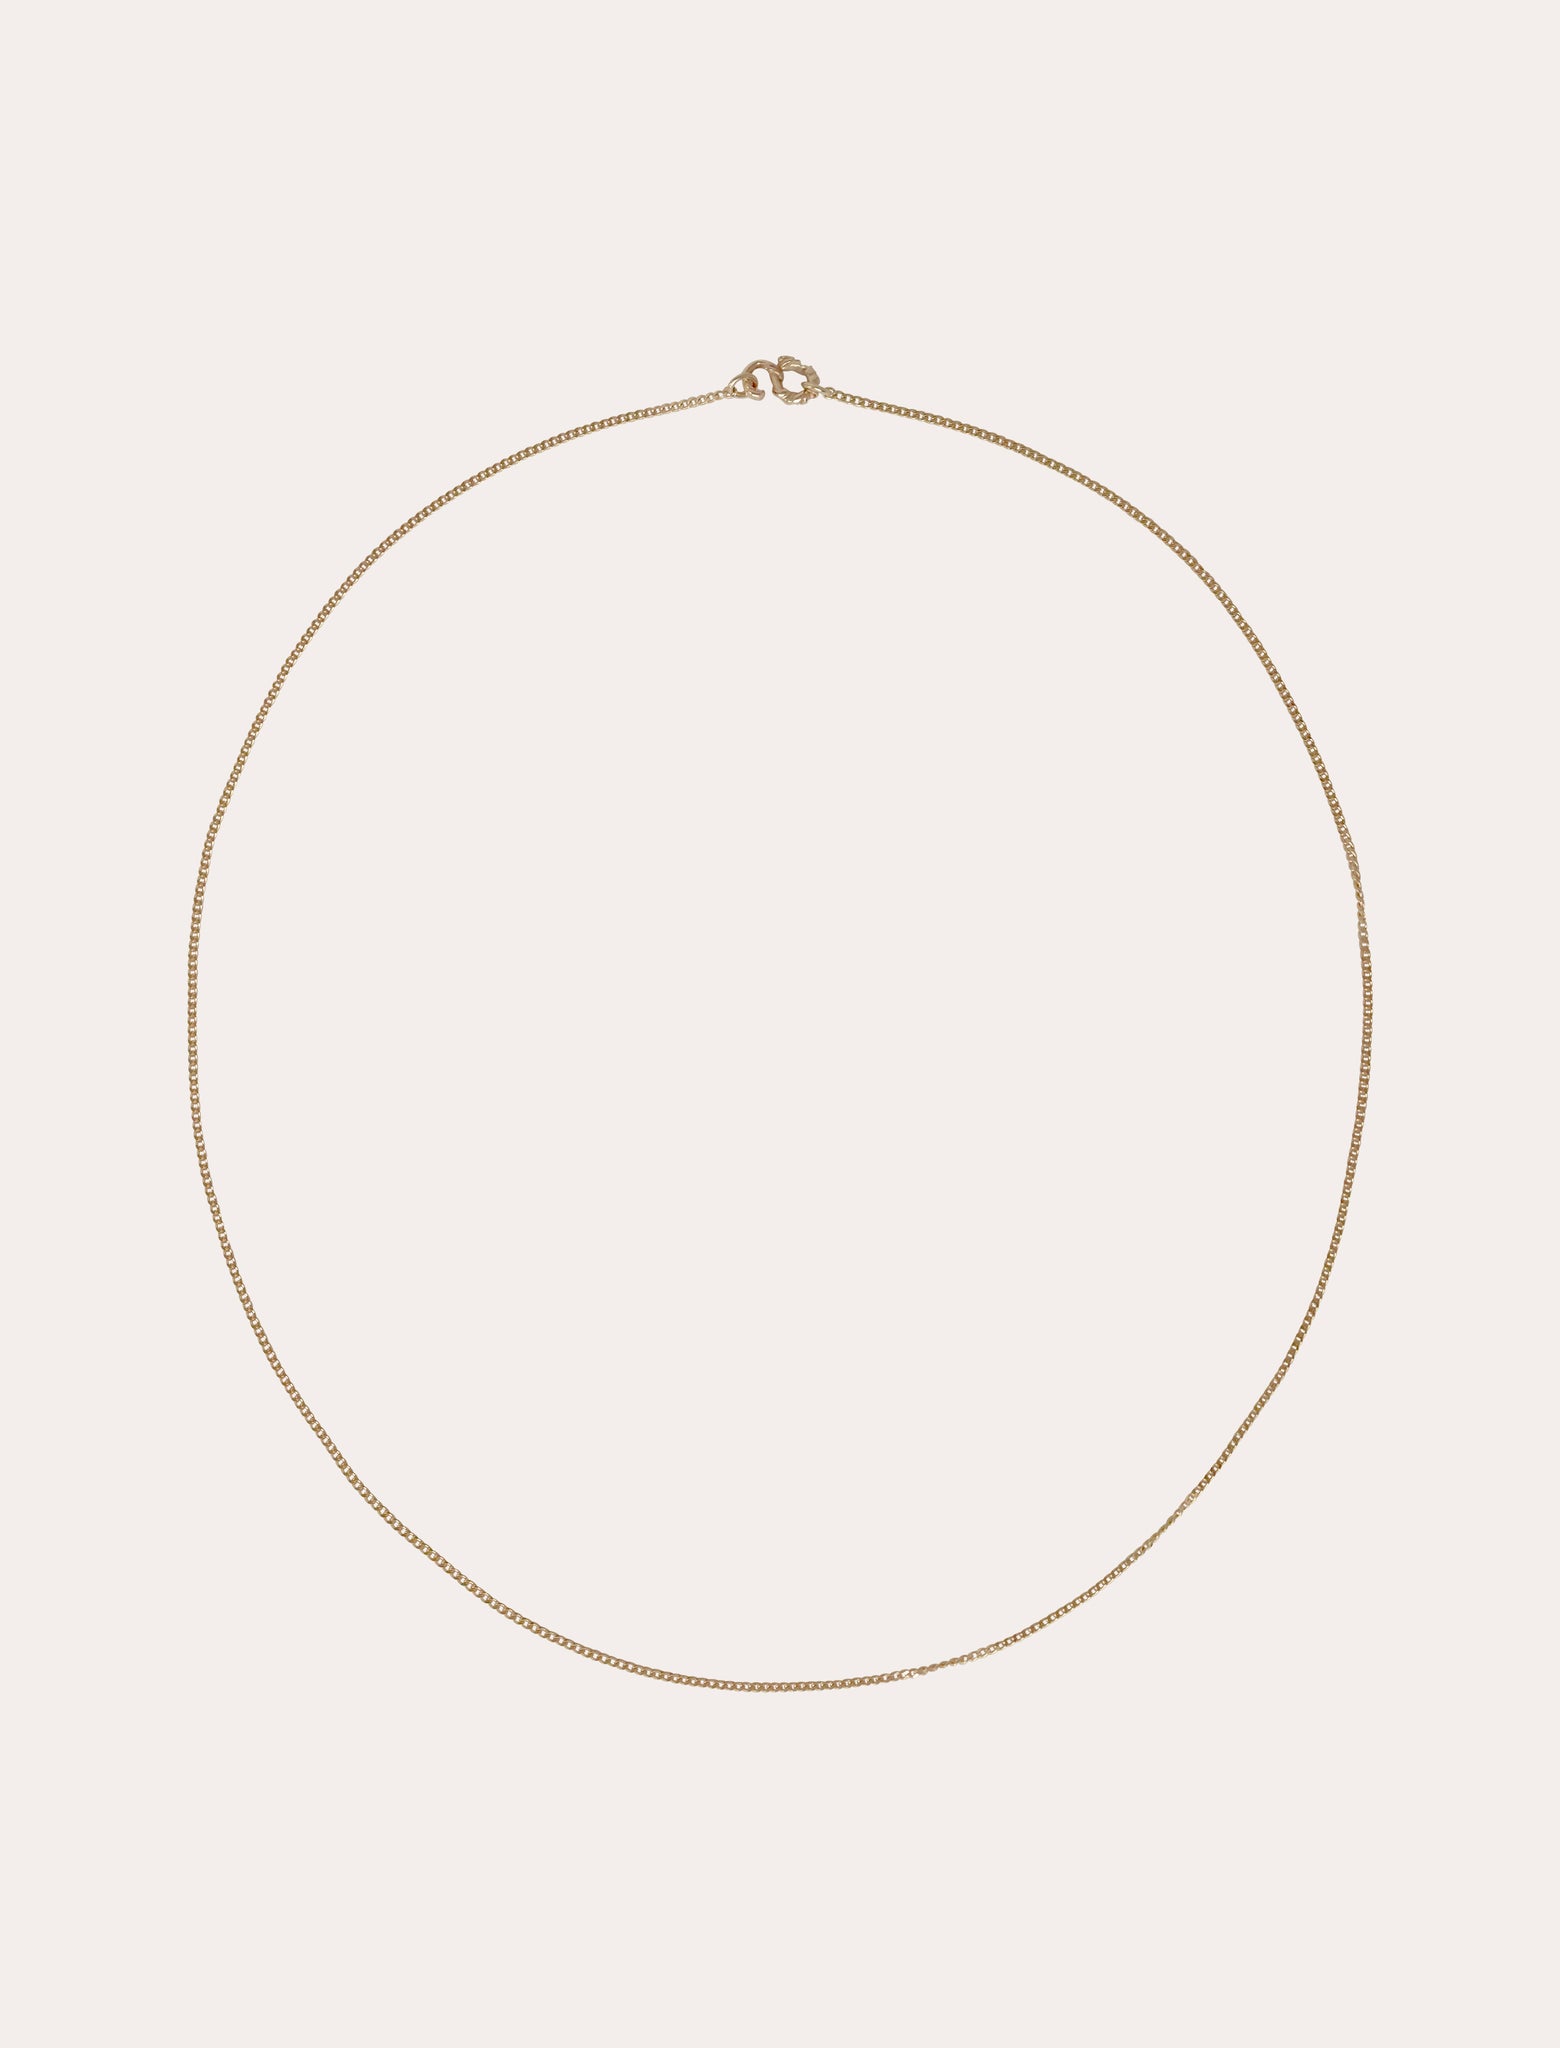 ANOTHER ASPECT x Corali, Kubi Necklace 14k Yellow Gold